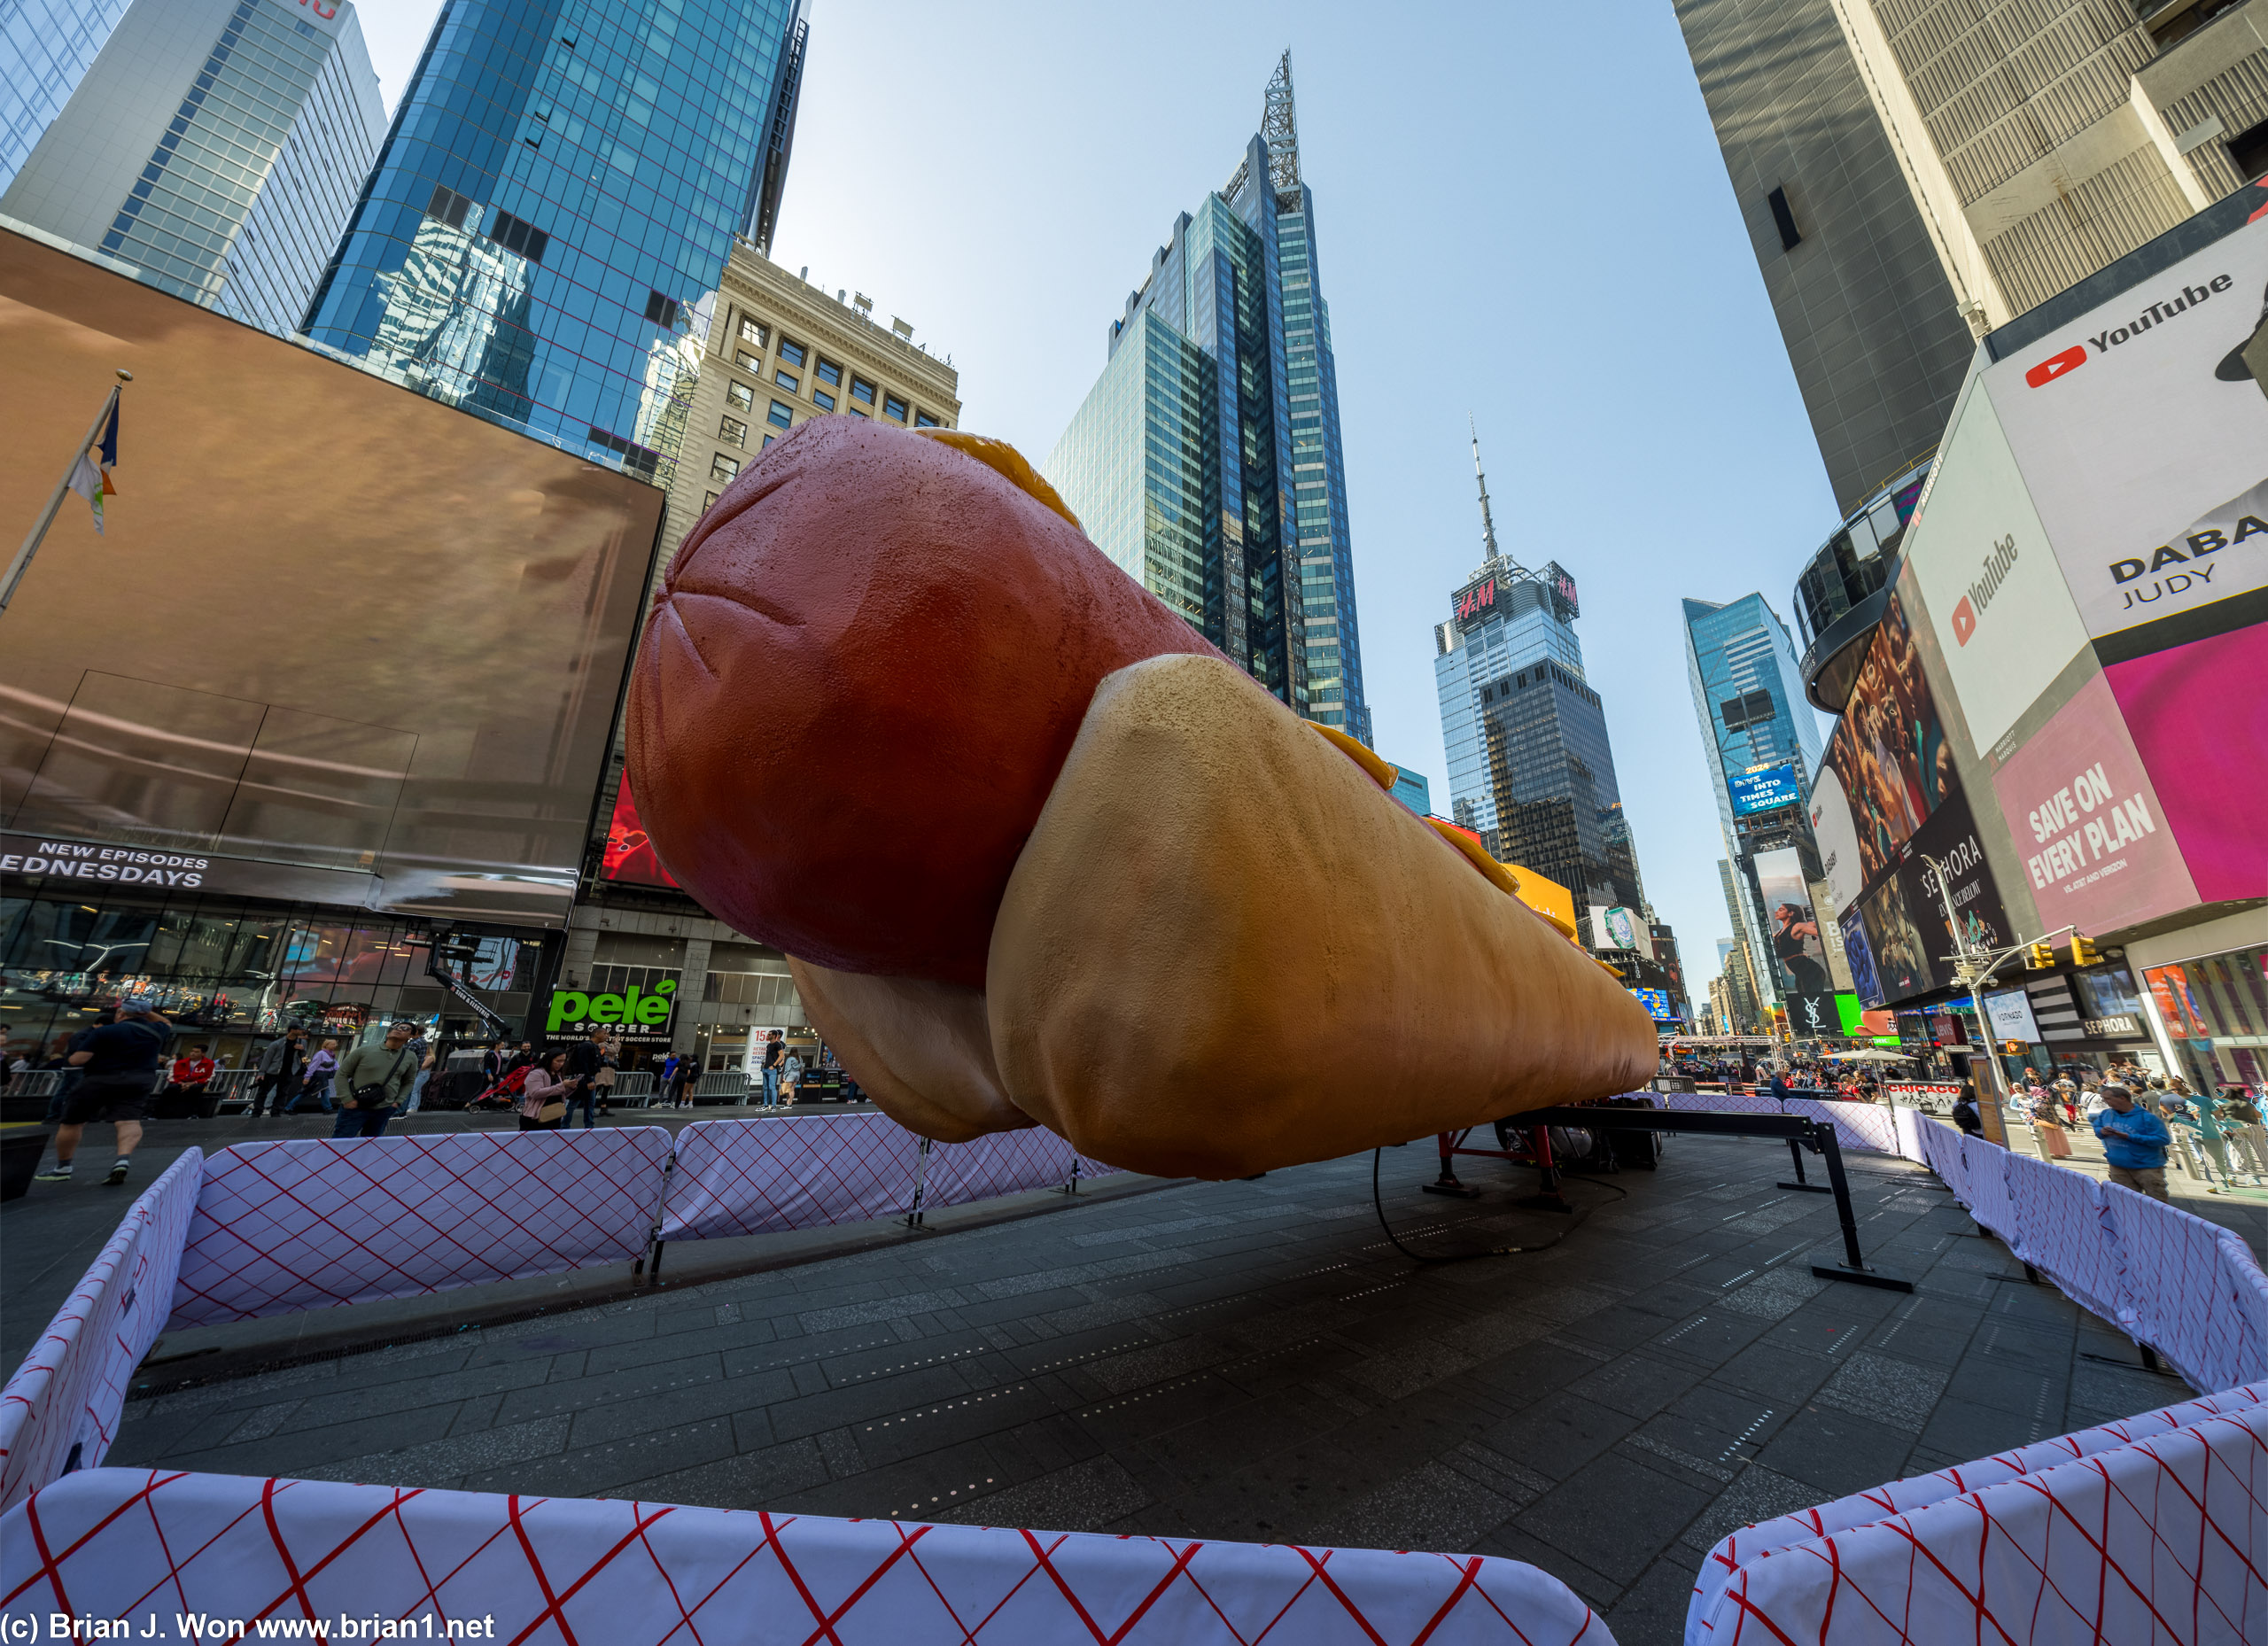 No idea why there is a giant hot dog in Times Square.